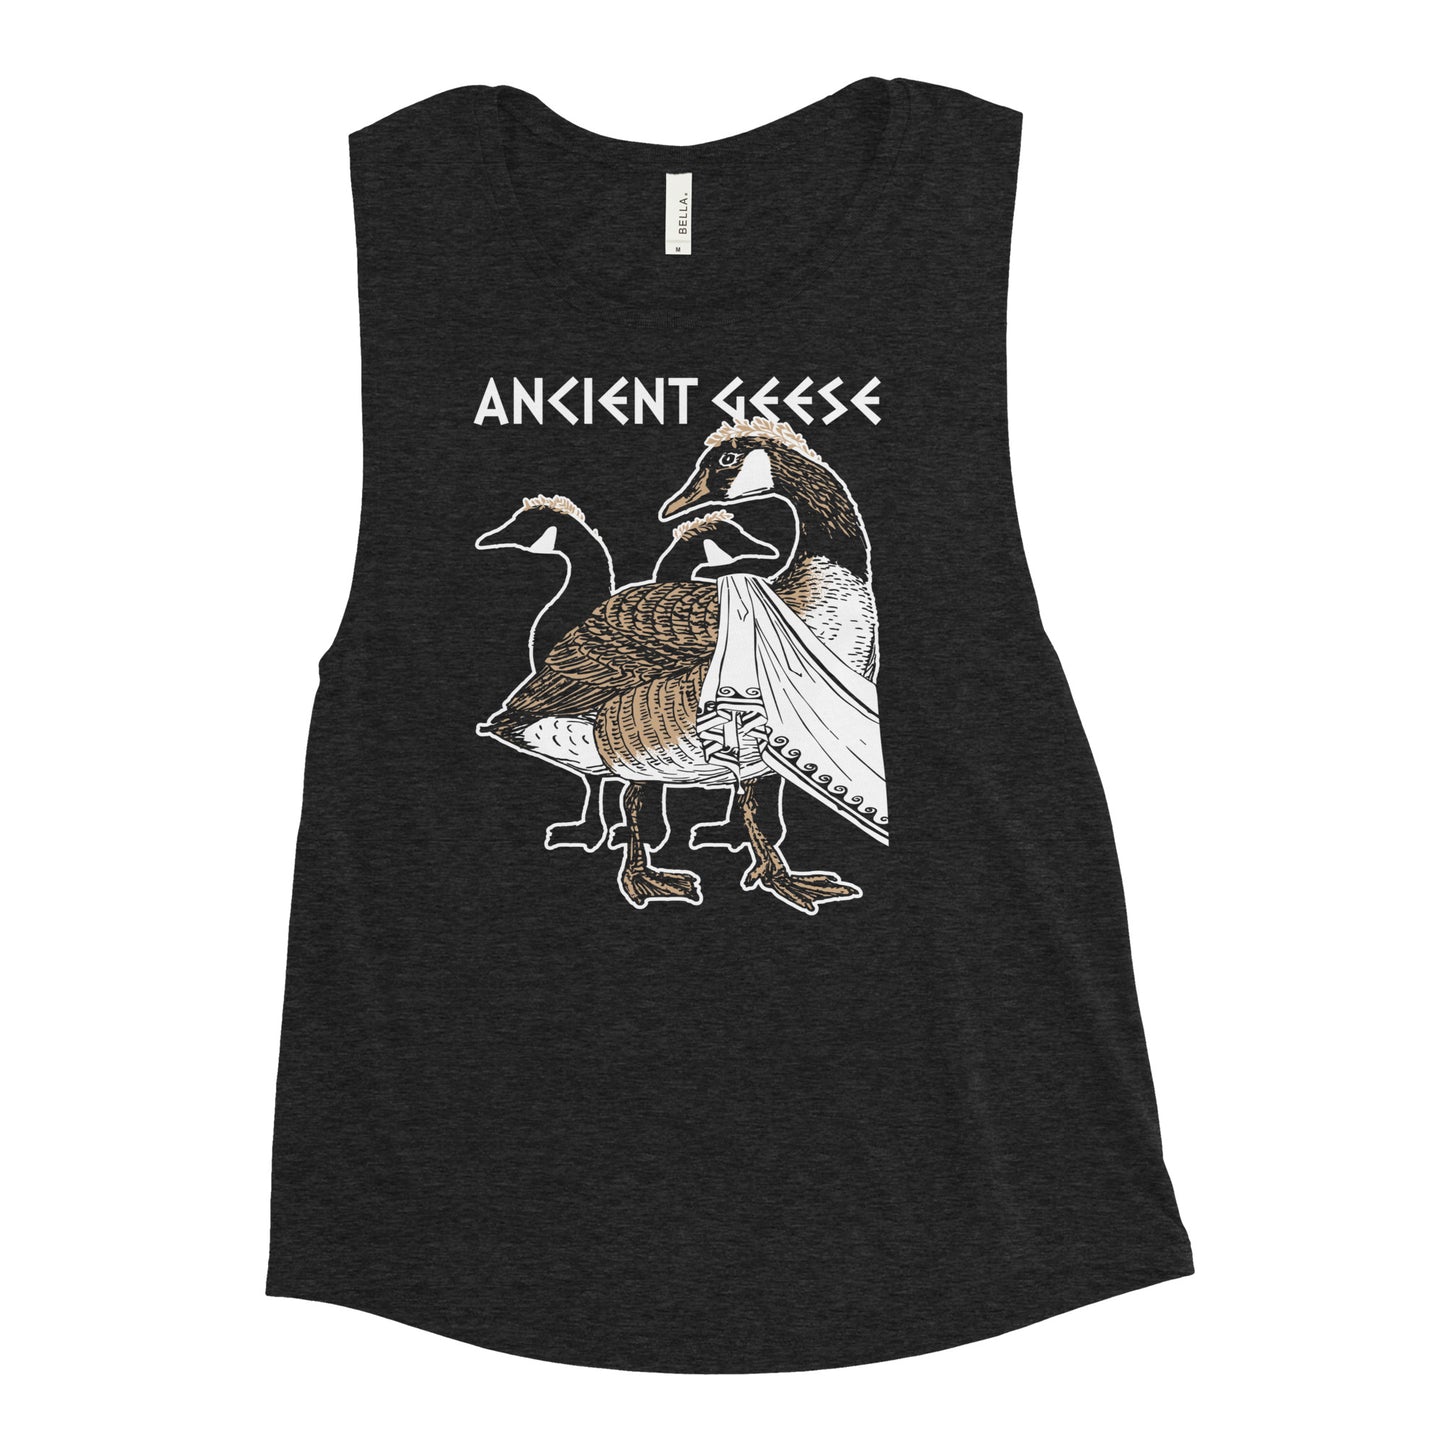 Ancient Geese Women's Muscle Tank